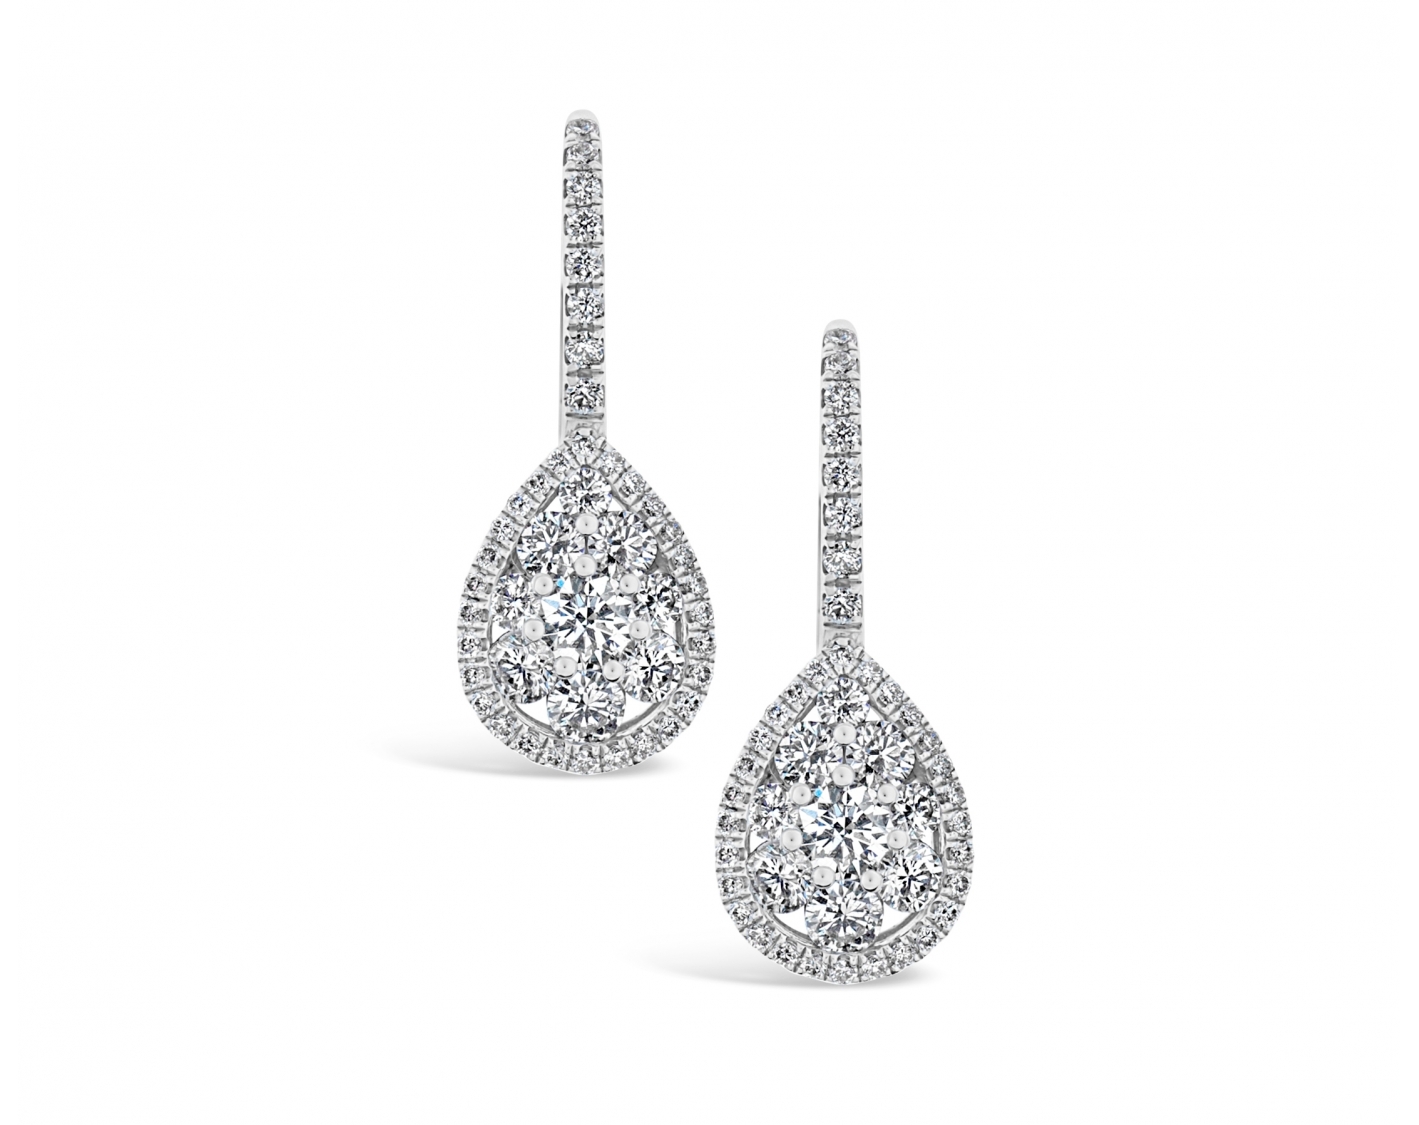 18K WHITE GOLD PEAR SHAPED ILLUSION SET DIAMOND EARRINGS WITH ROUND UPSTONES